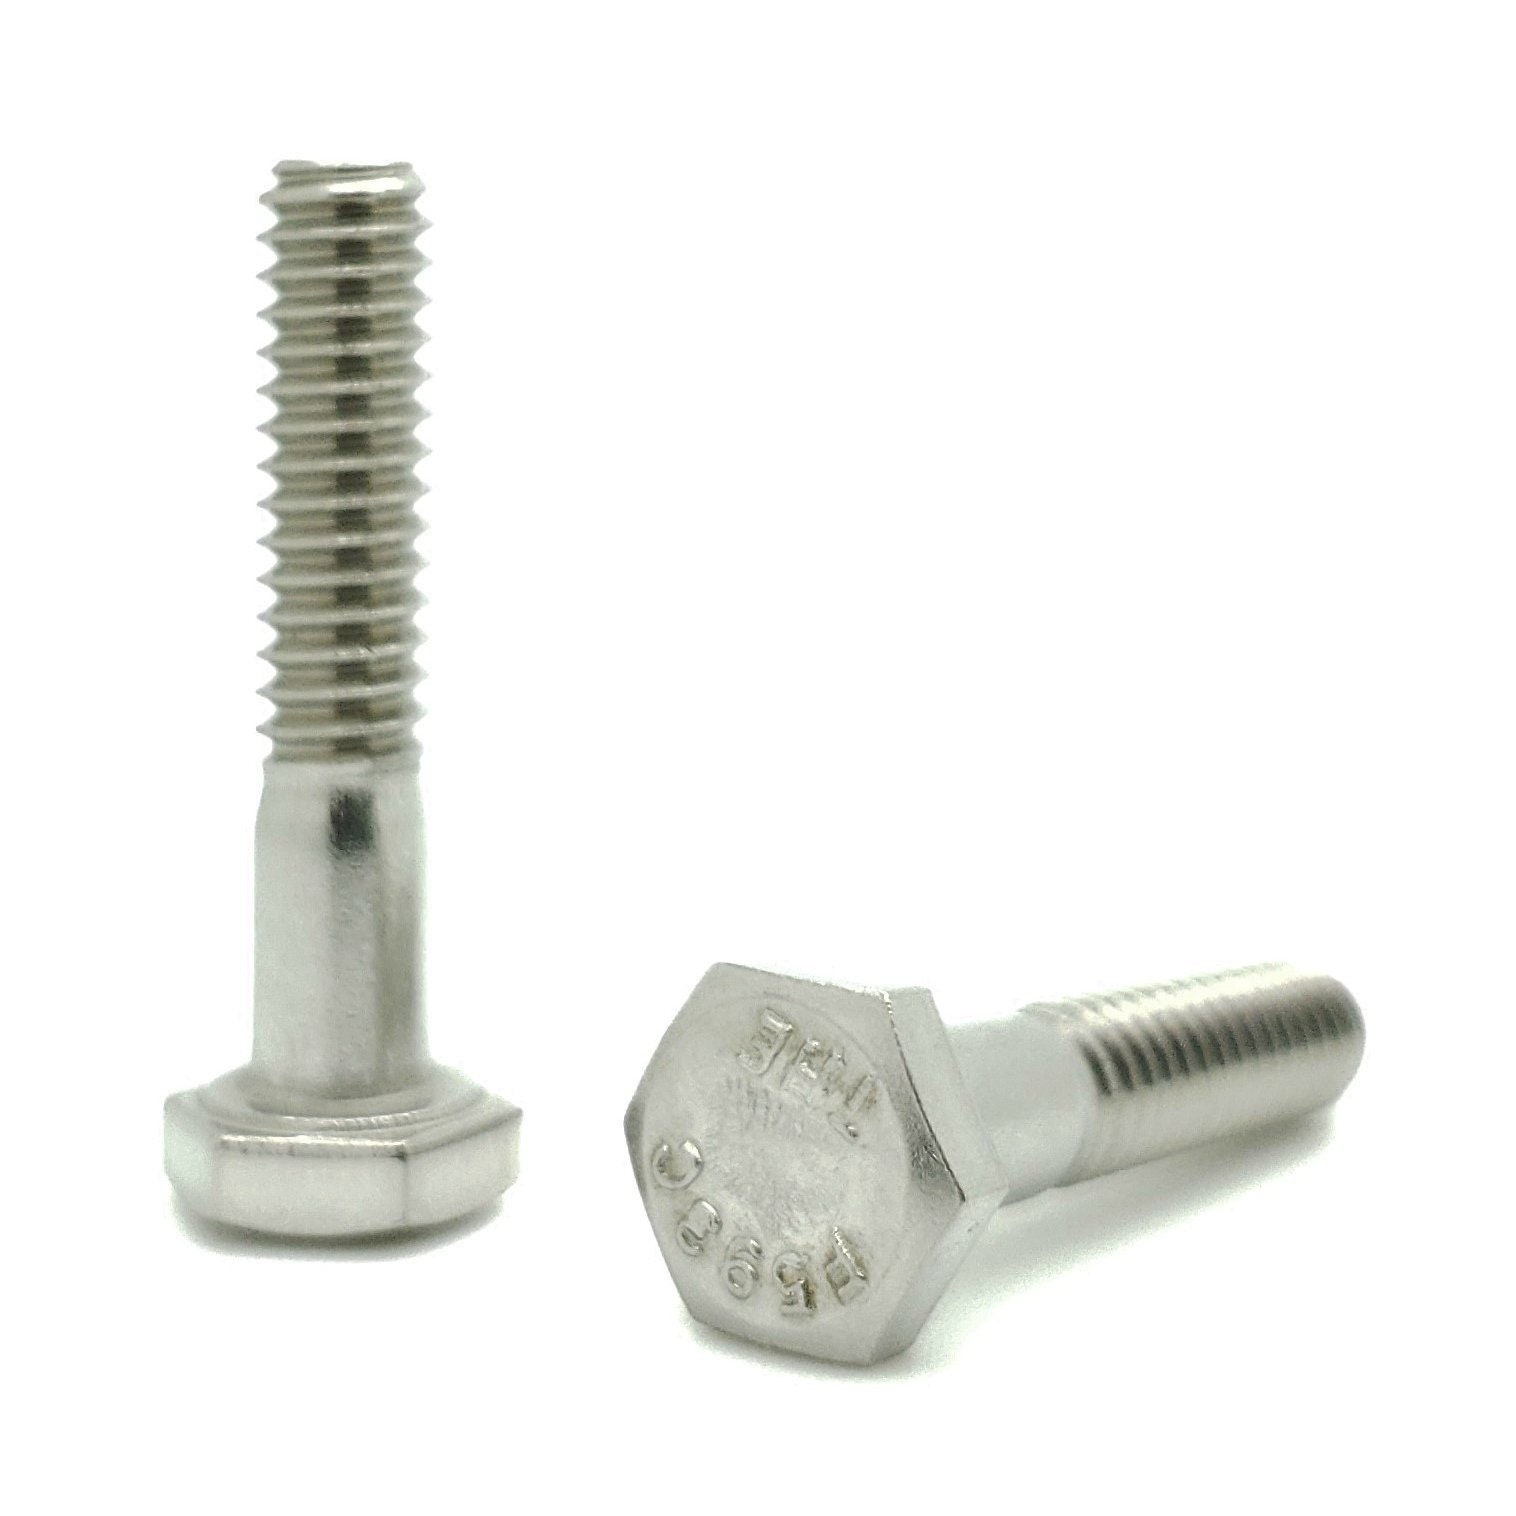 1/4-20 x 1/2" Hex Head Bolts Stainless Steel Fully Threaded Qty 50 